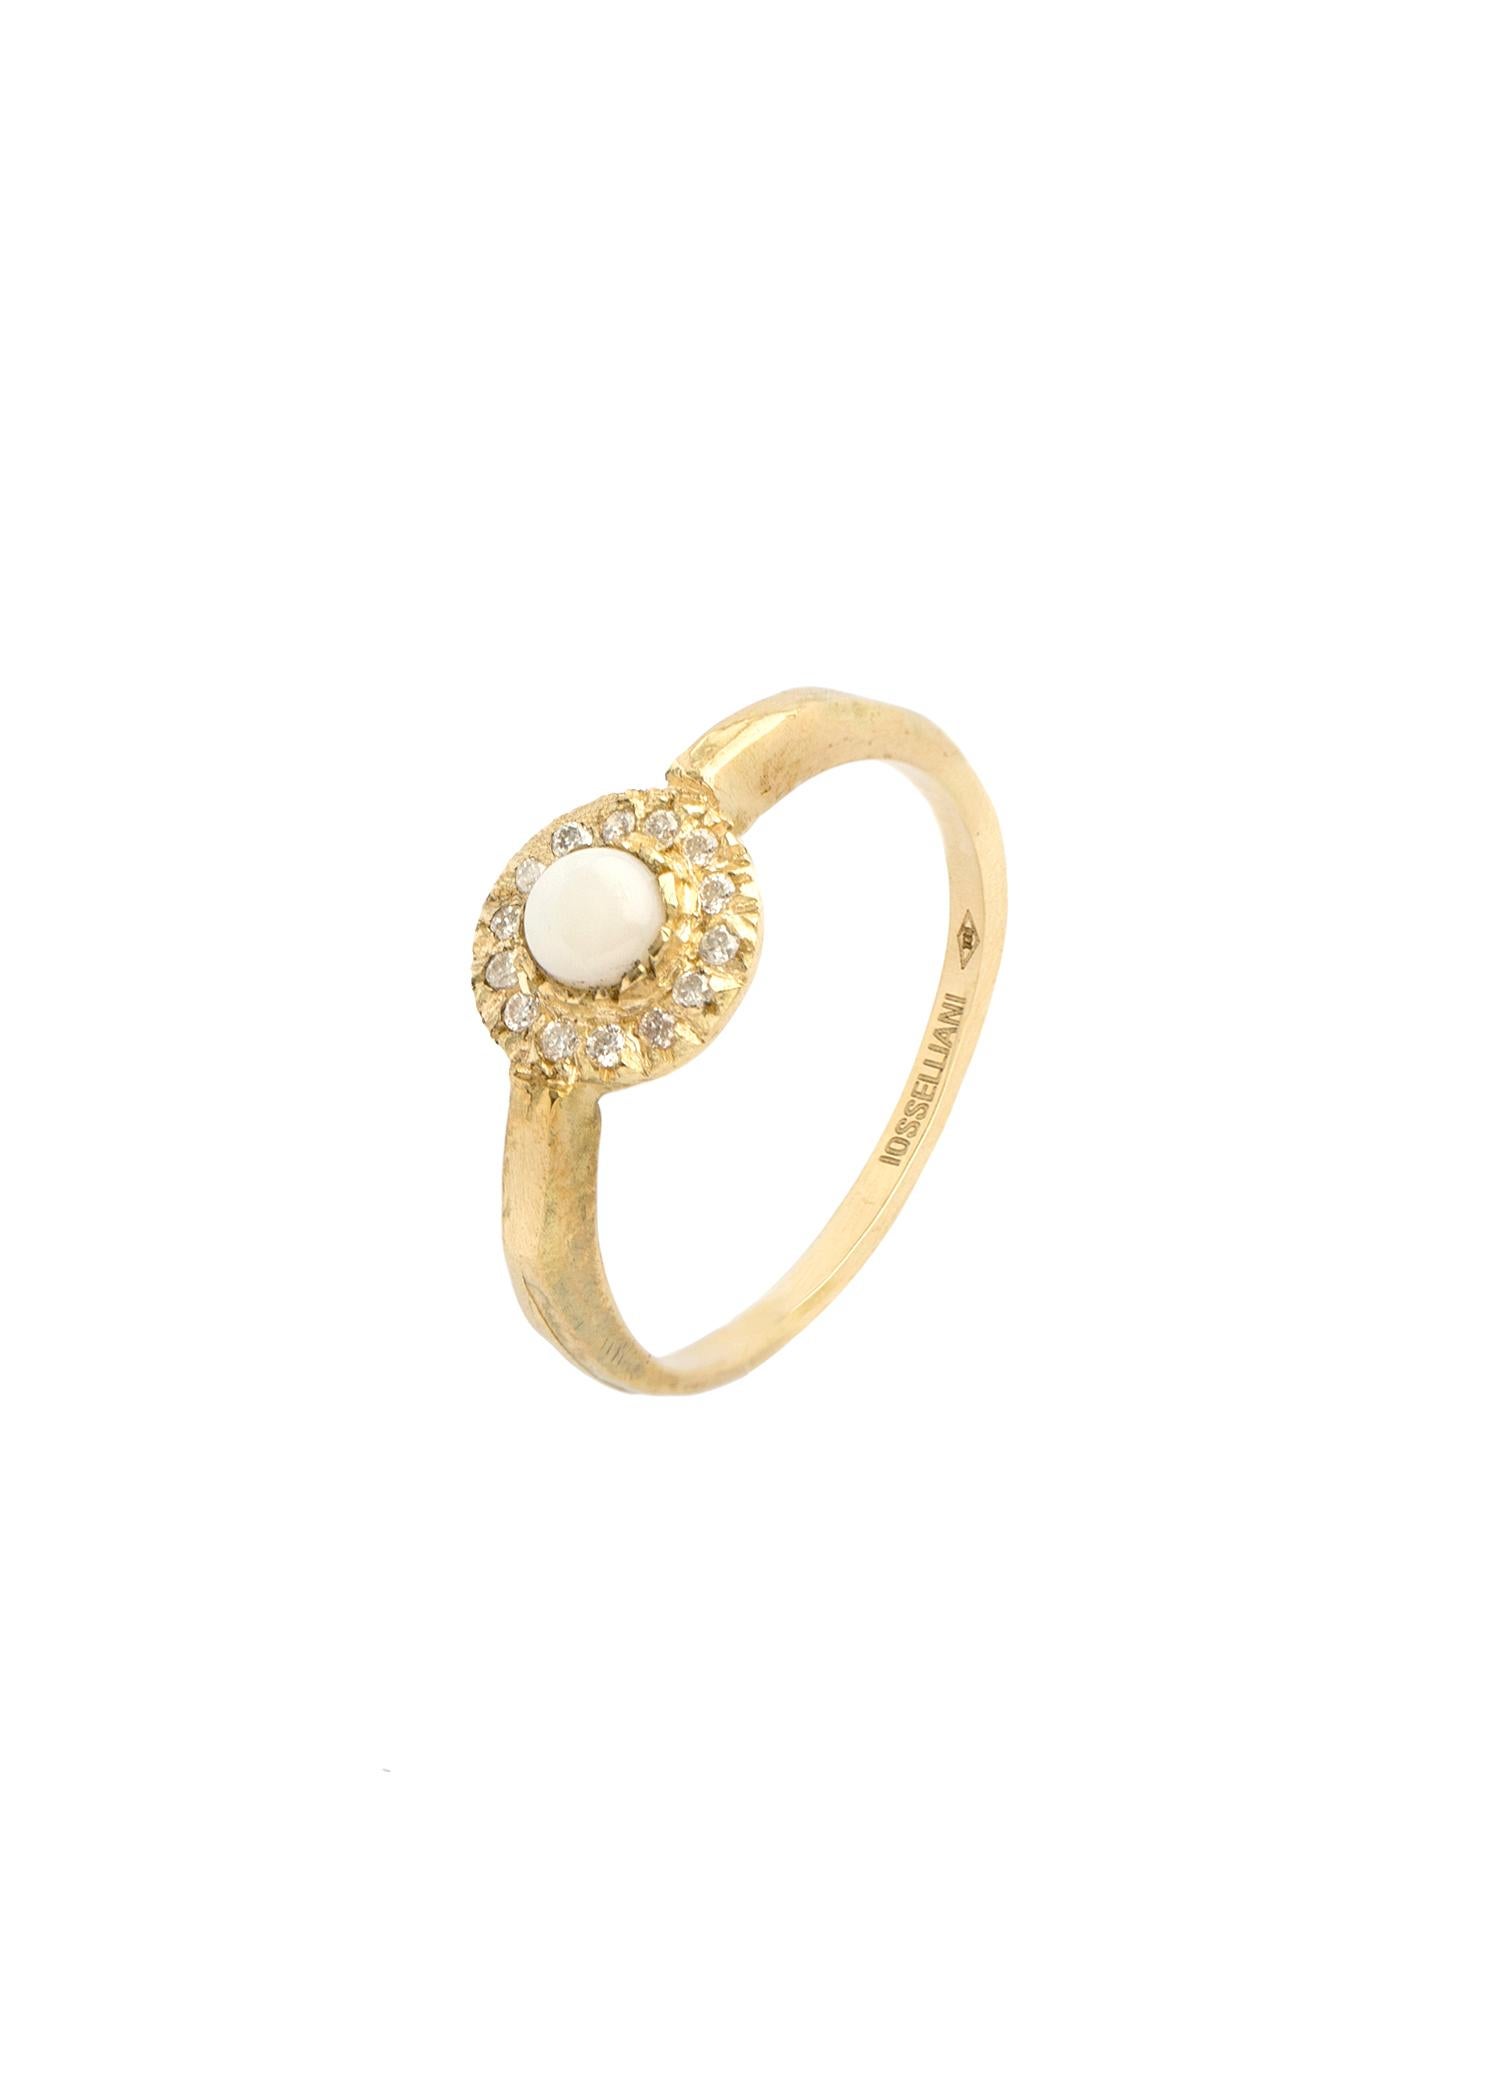 Contemporary Engagement Ring in 18 Carat Yellow Gold and White Diamonds from IOSSELLIANI For Sale